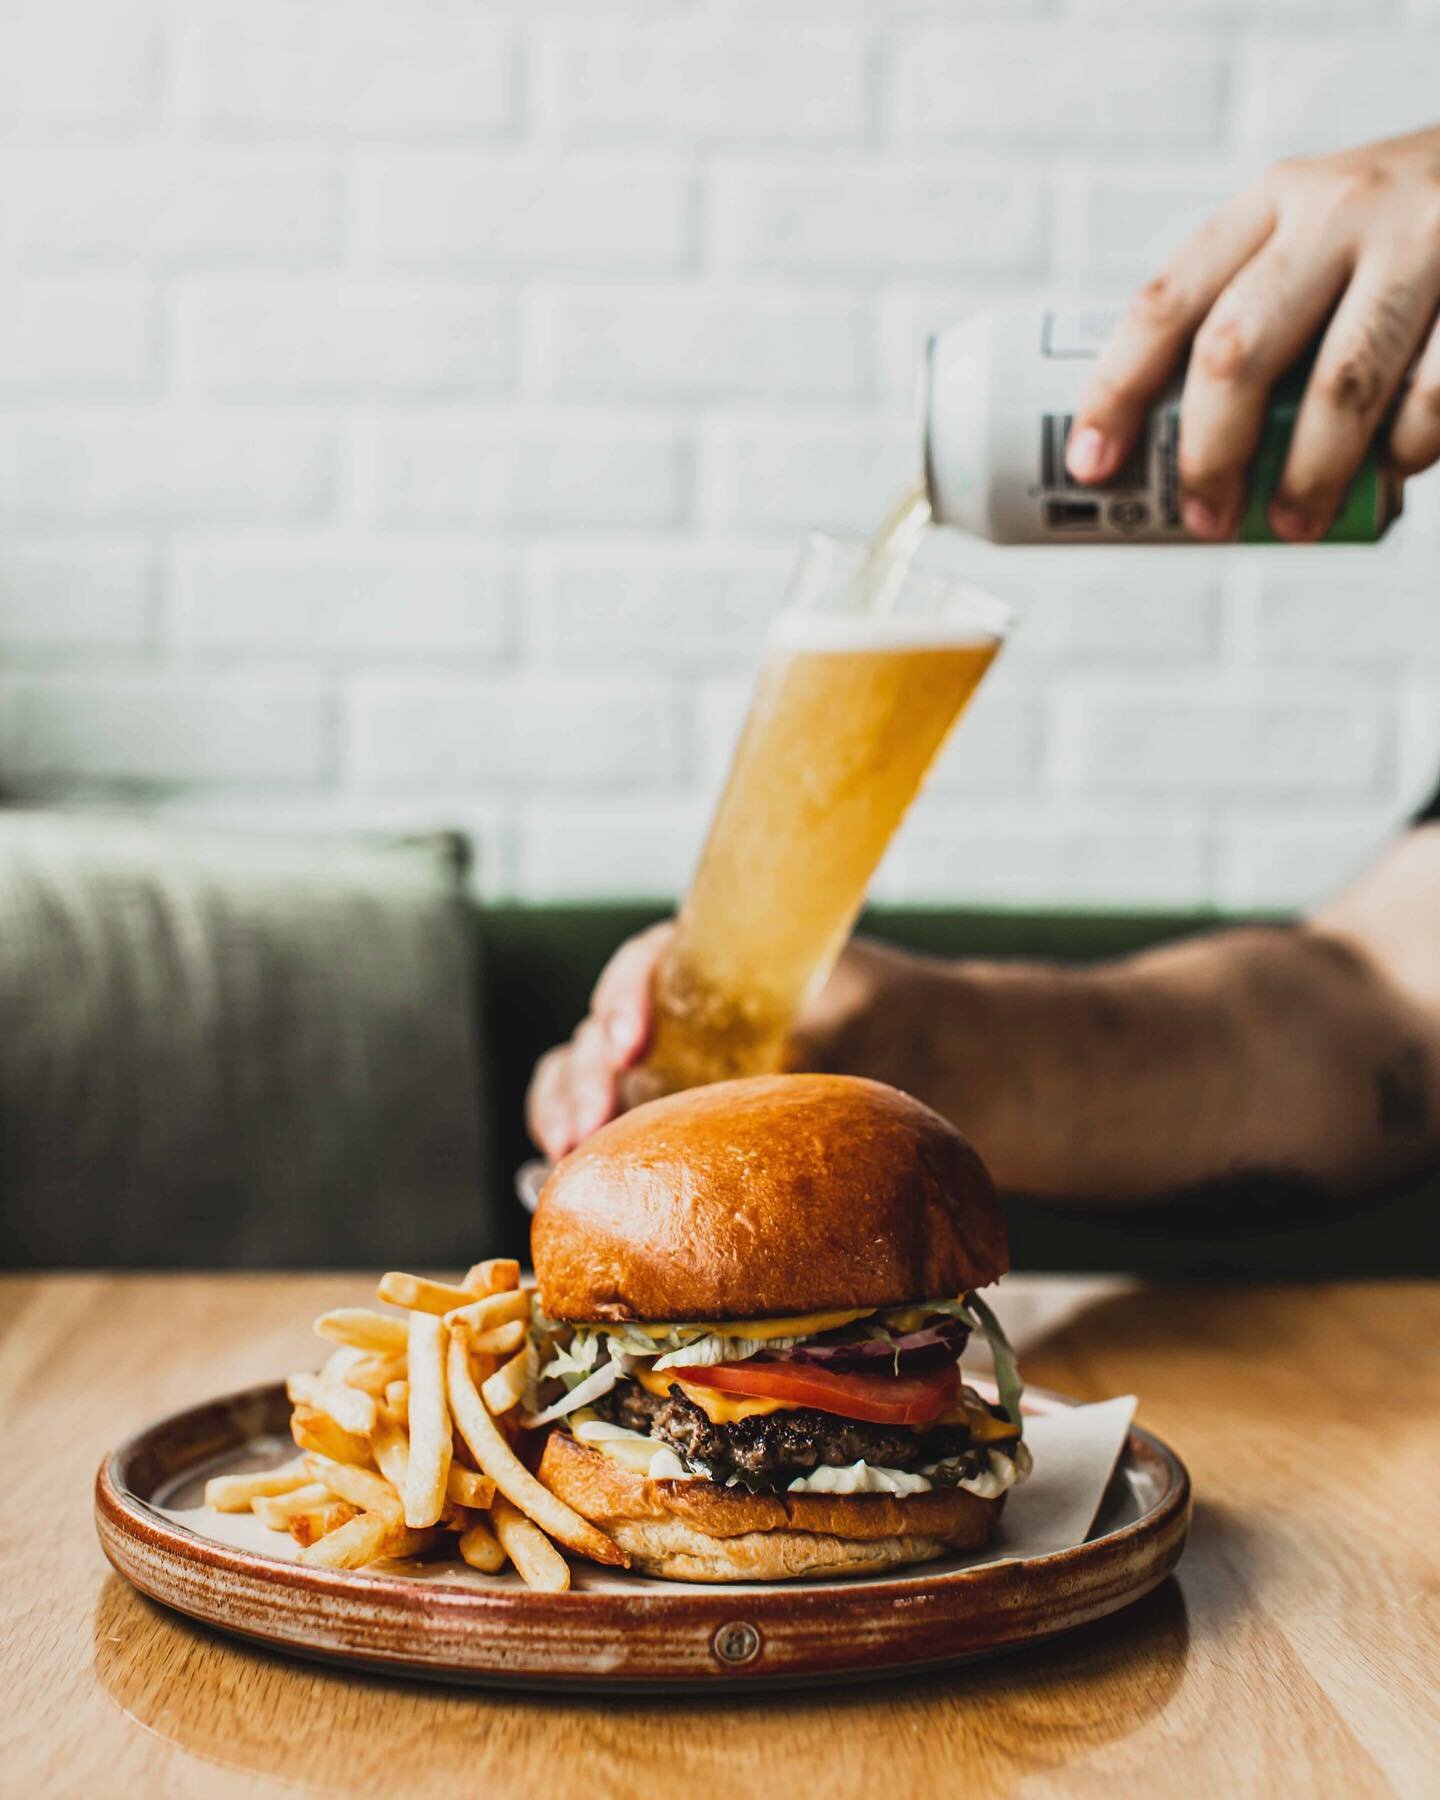 Burgers 🍔 &amp; Beers 🍺 
Crack a @baltertaproom and enjoy it over lunch with a Wagyu burger 😃
Snapped by @rachaelbaskerville 📸
#mawestend #brisbane #cafe